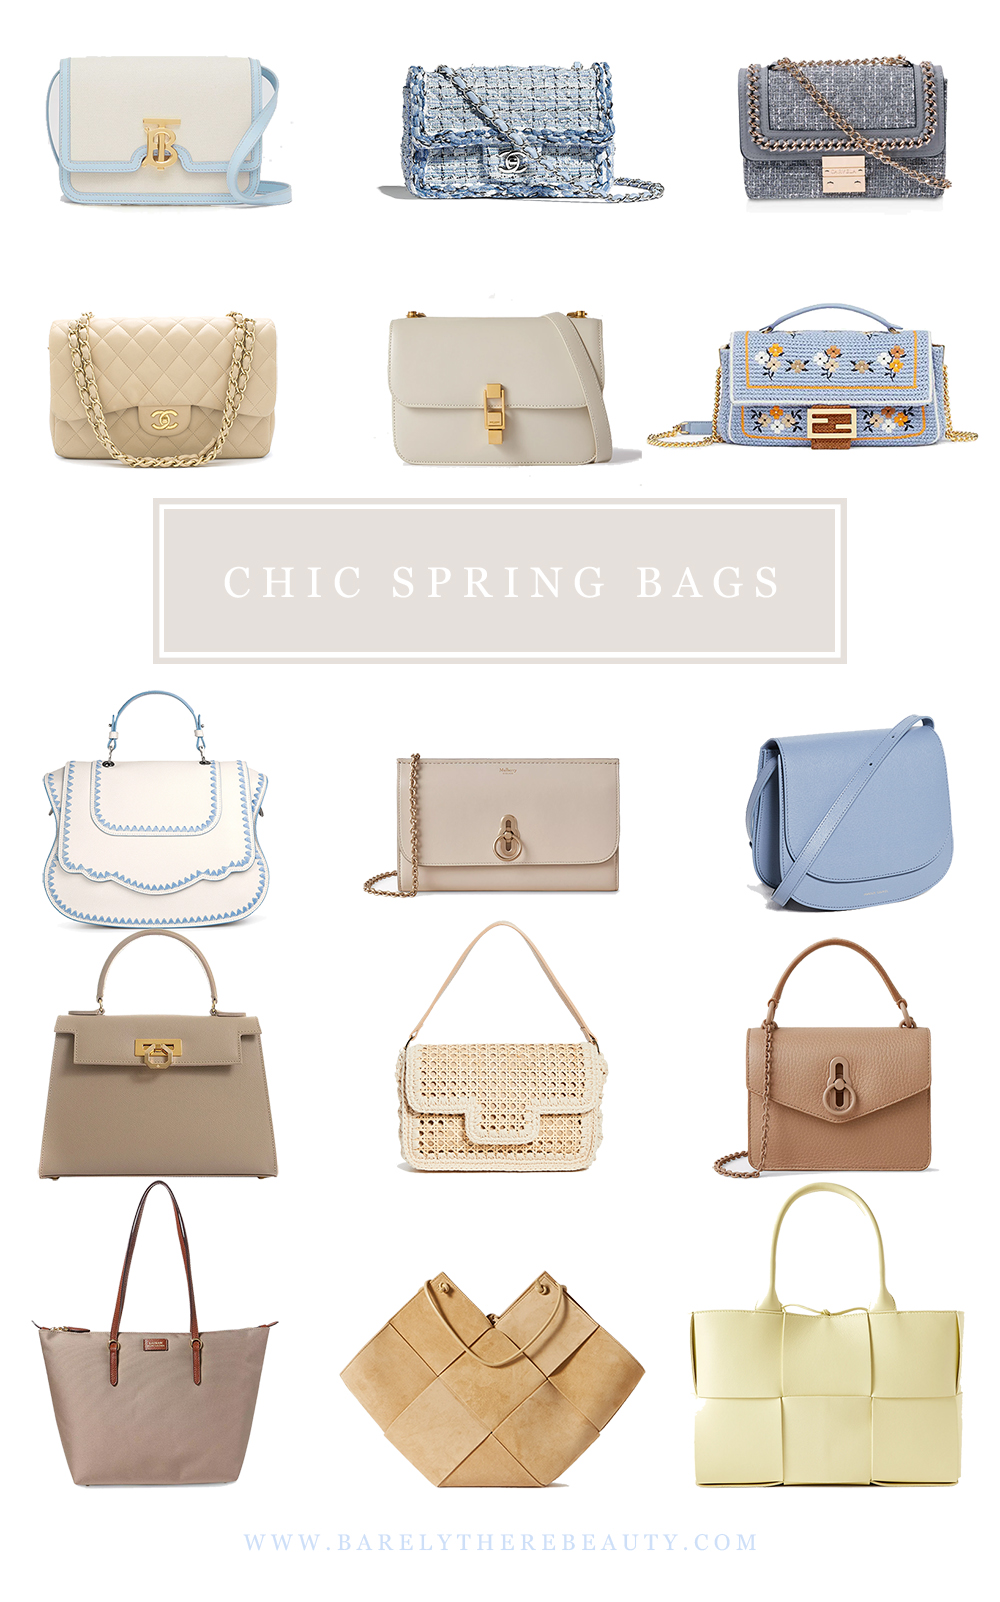 Chic-spring-bags